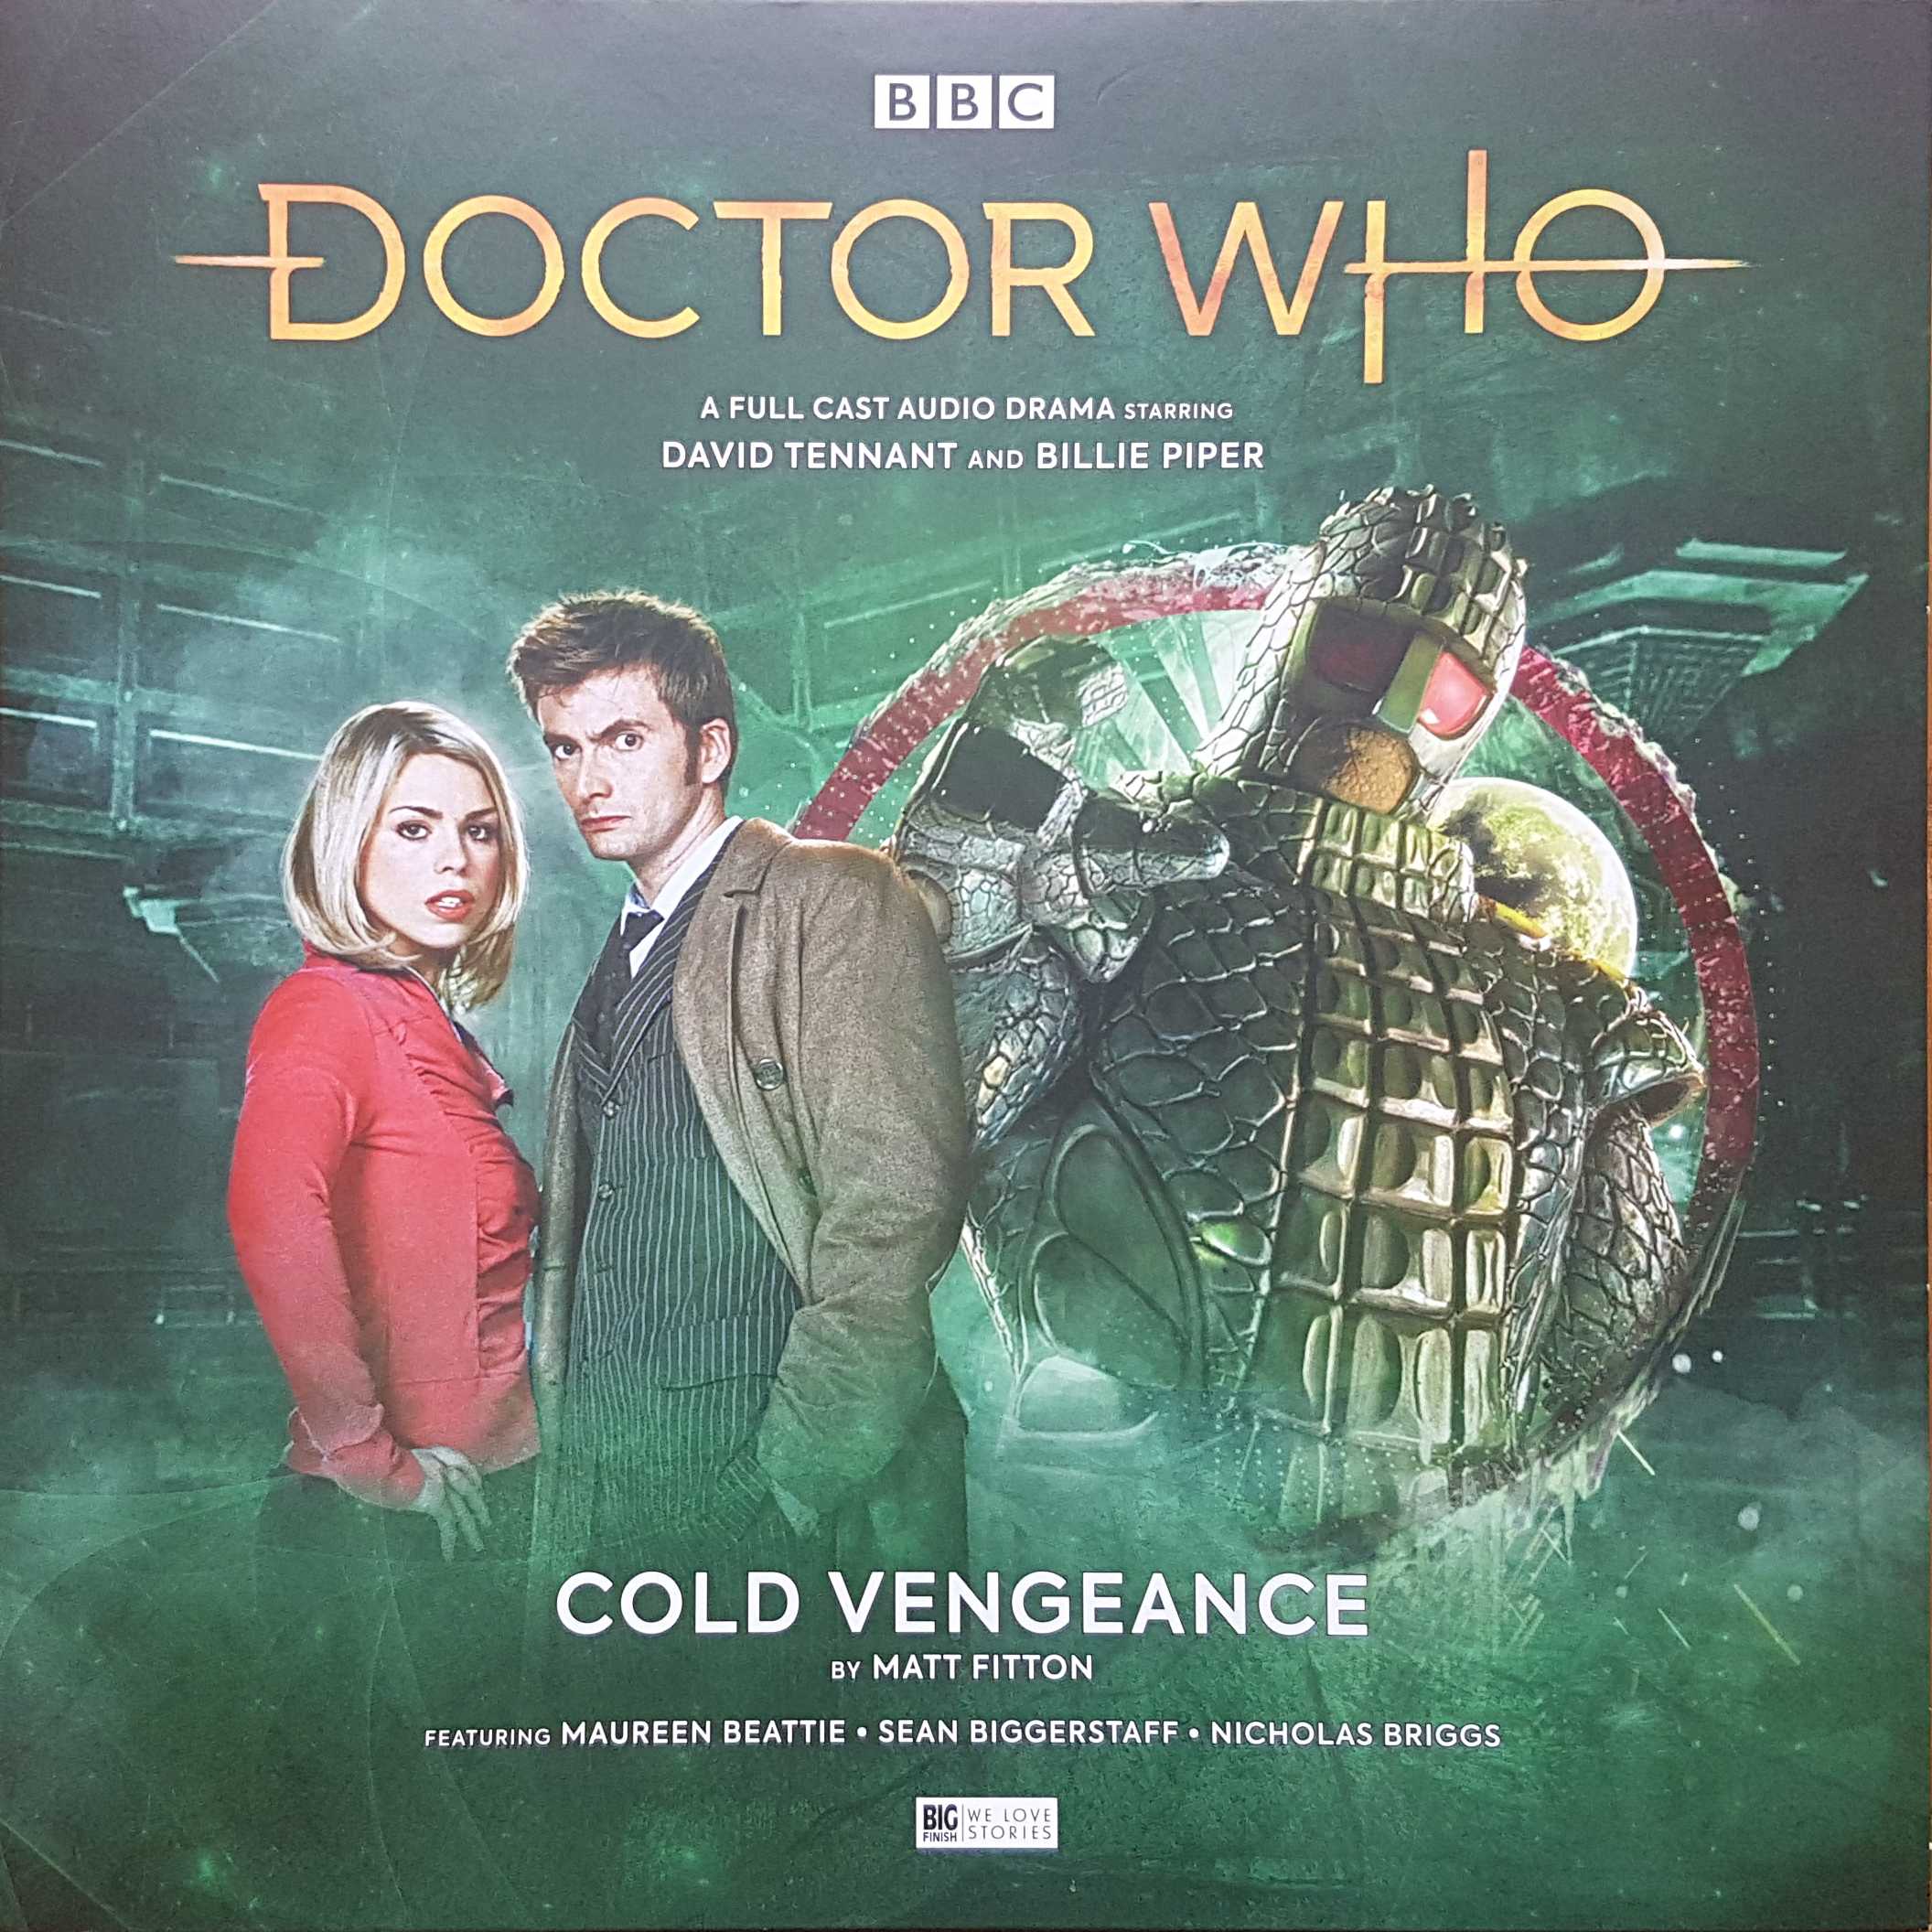 Picture of Doctor Who - Cold Vengeance by artist Matt Fitton from the BBC albums - Records and Tapes library